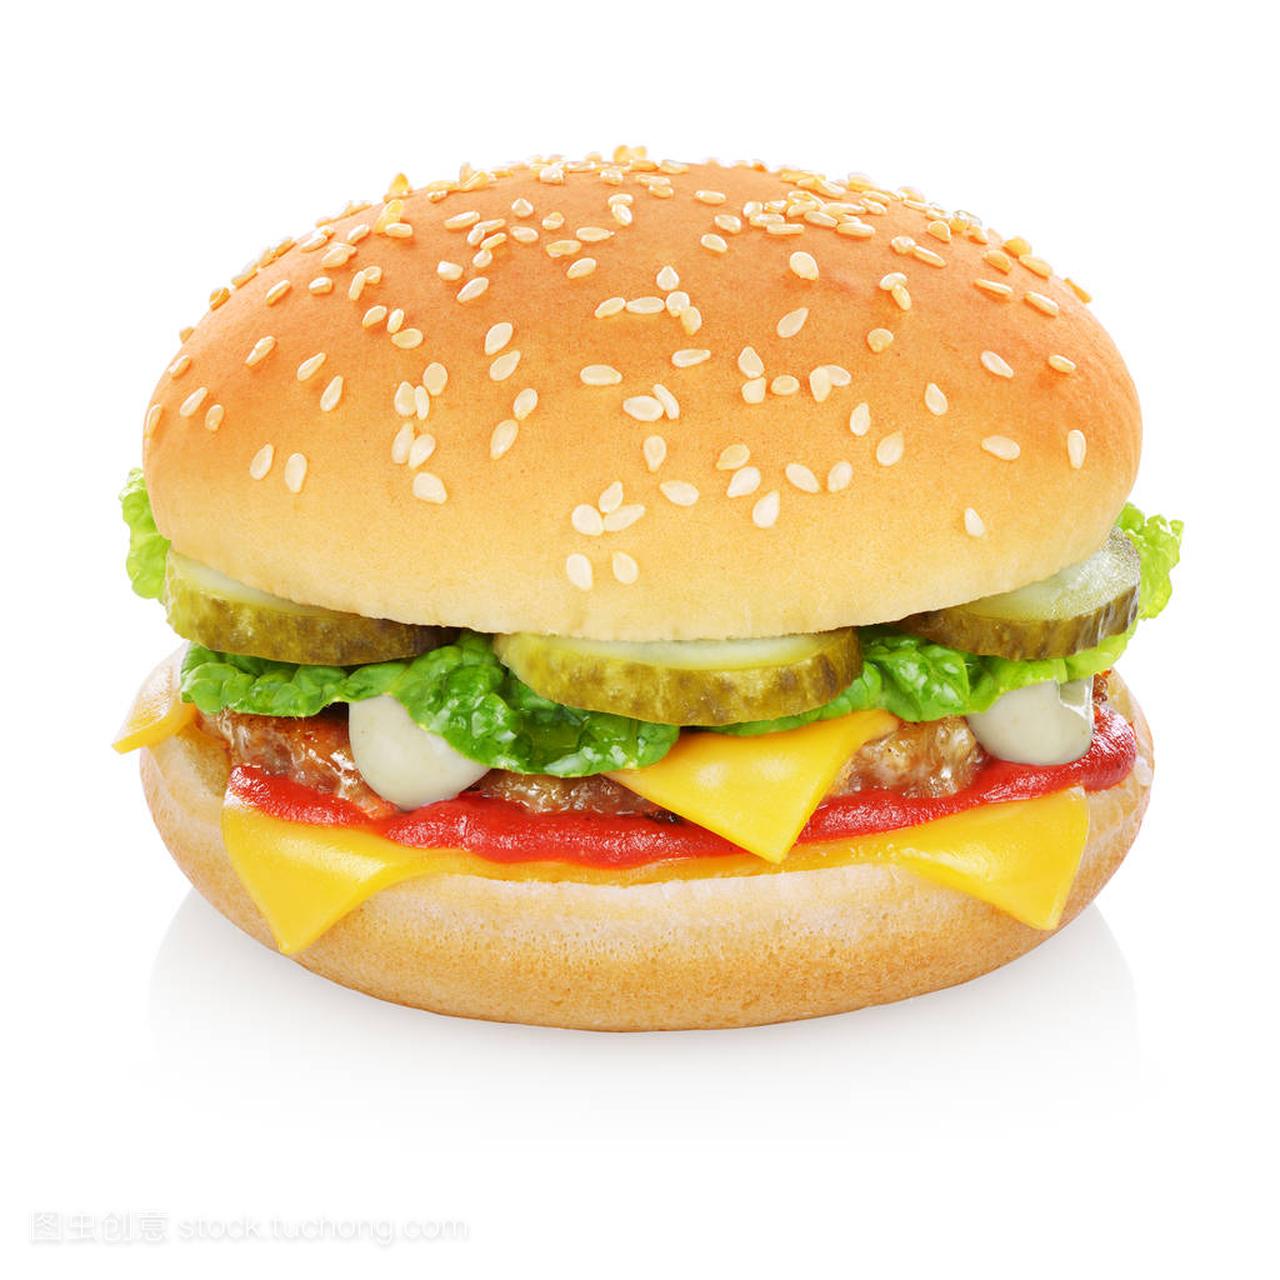 Cheeseburger with cheese, pickles, tomato, 